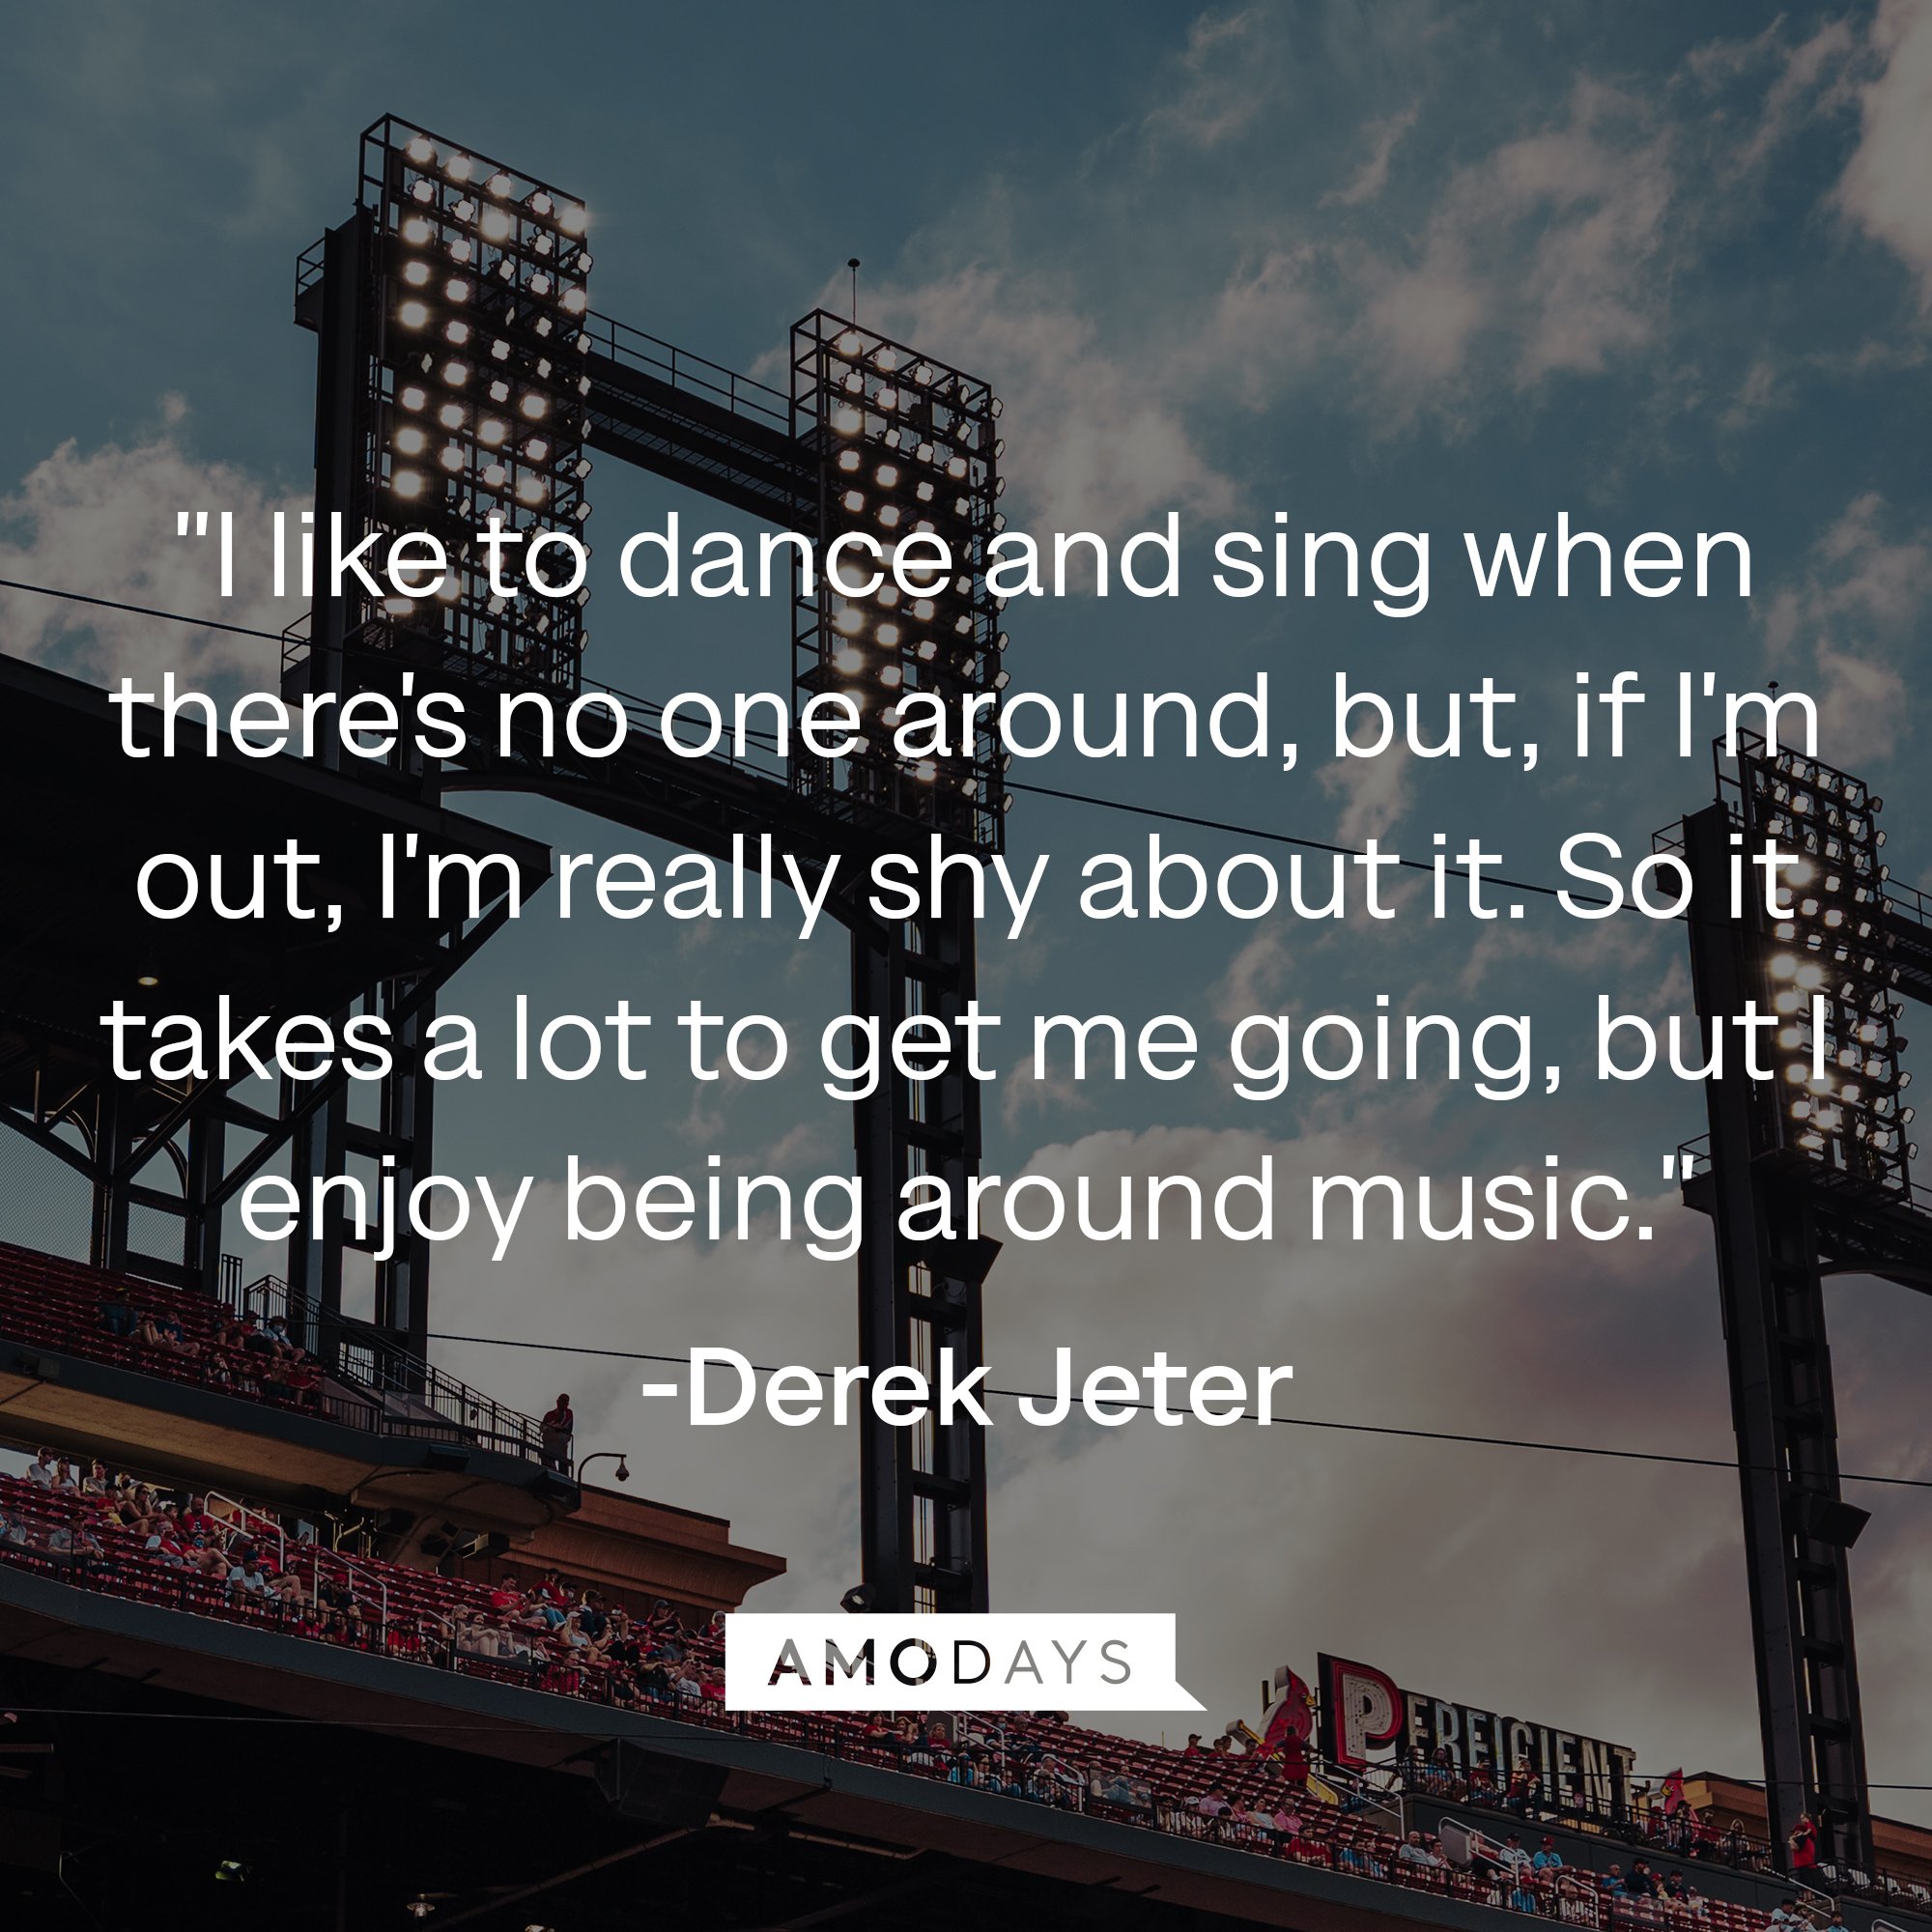 Derek Jeter's quote: "I like to dance and sing when there's no one around, but, if I'm out, I'm really shy about it. So it takes a lot to get me going, but I enjoy being around music." | Image: AmoDays